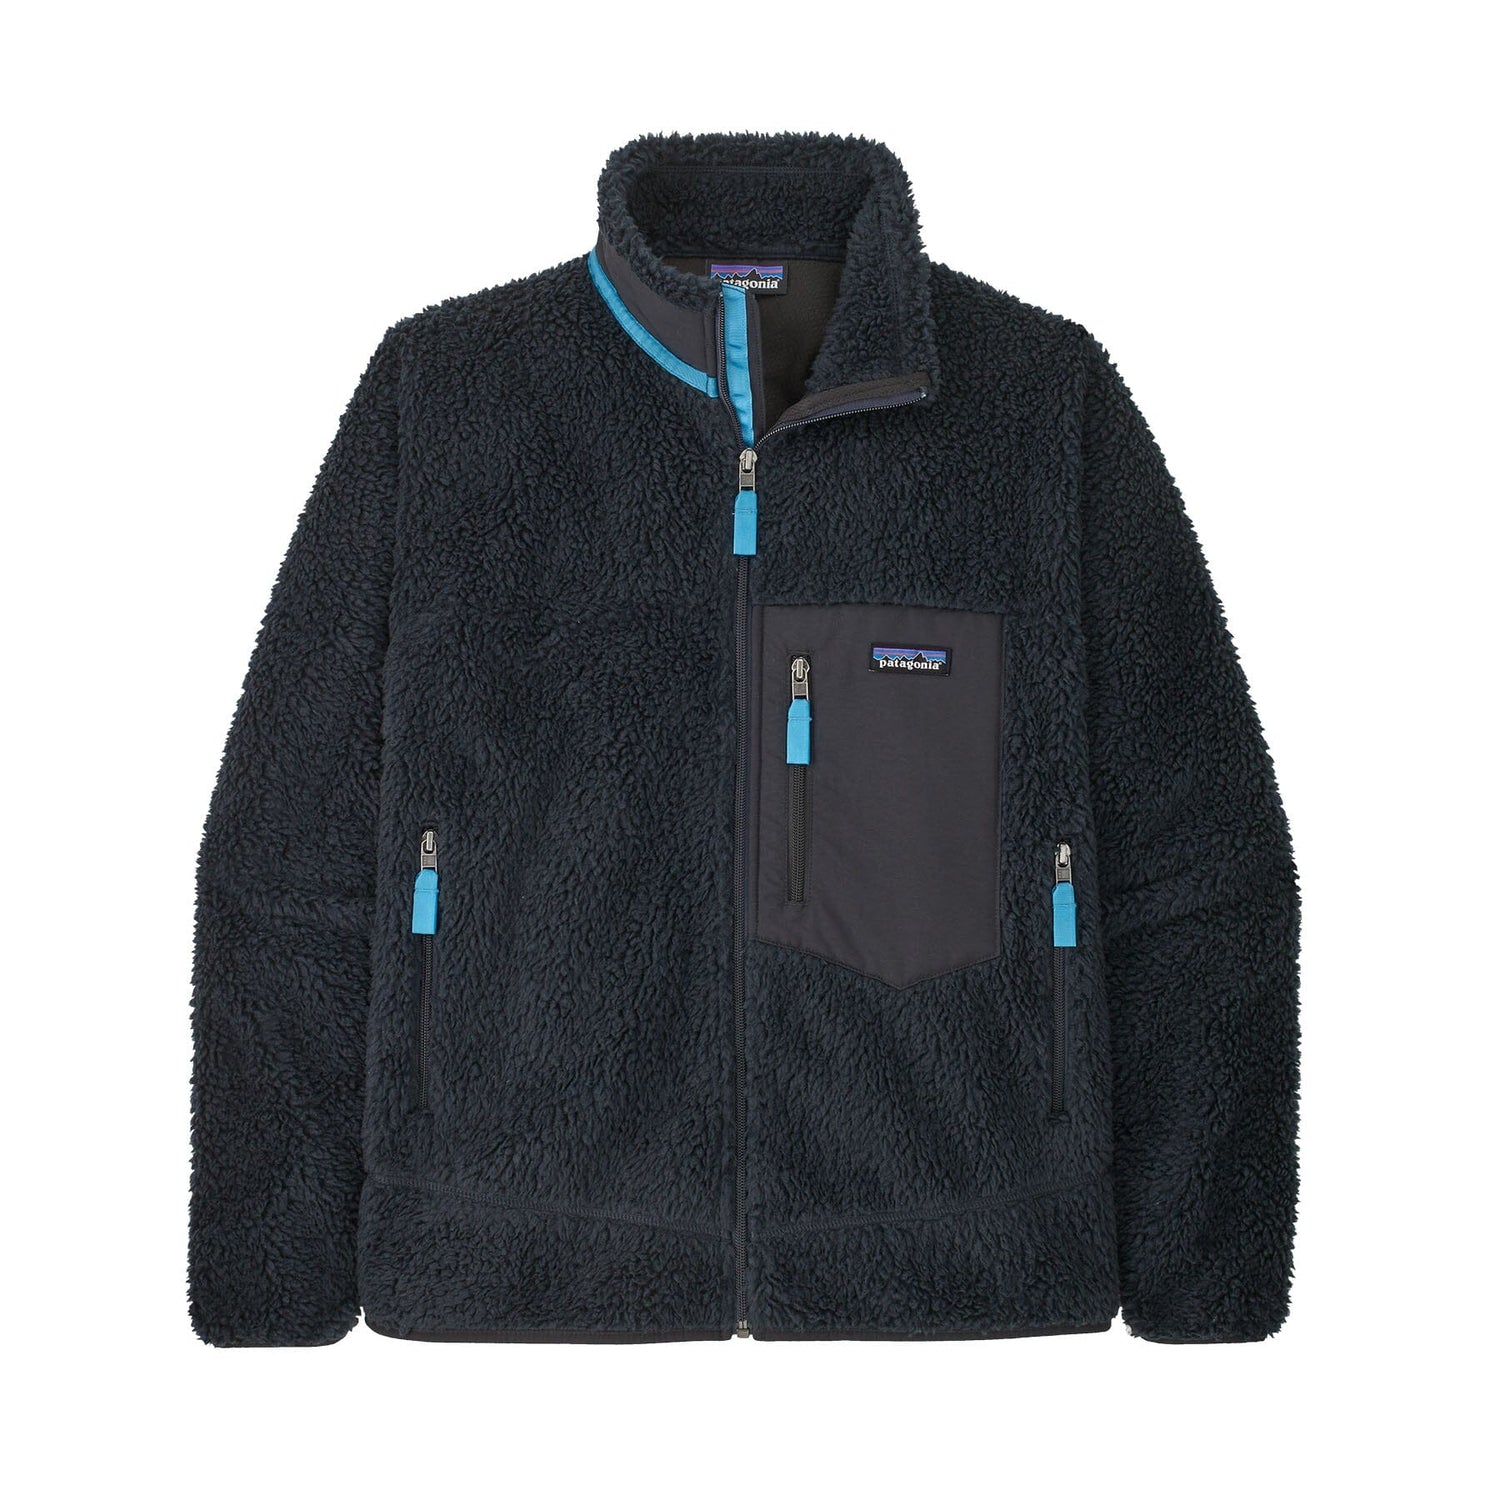 Patagonia M's Classic Retro-X Fleece Jacket - Recycled Polyester Pitch Blue Jacket